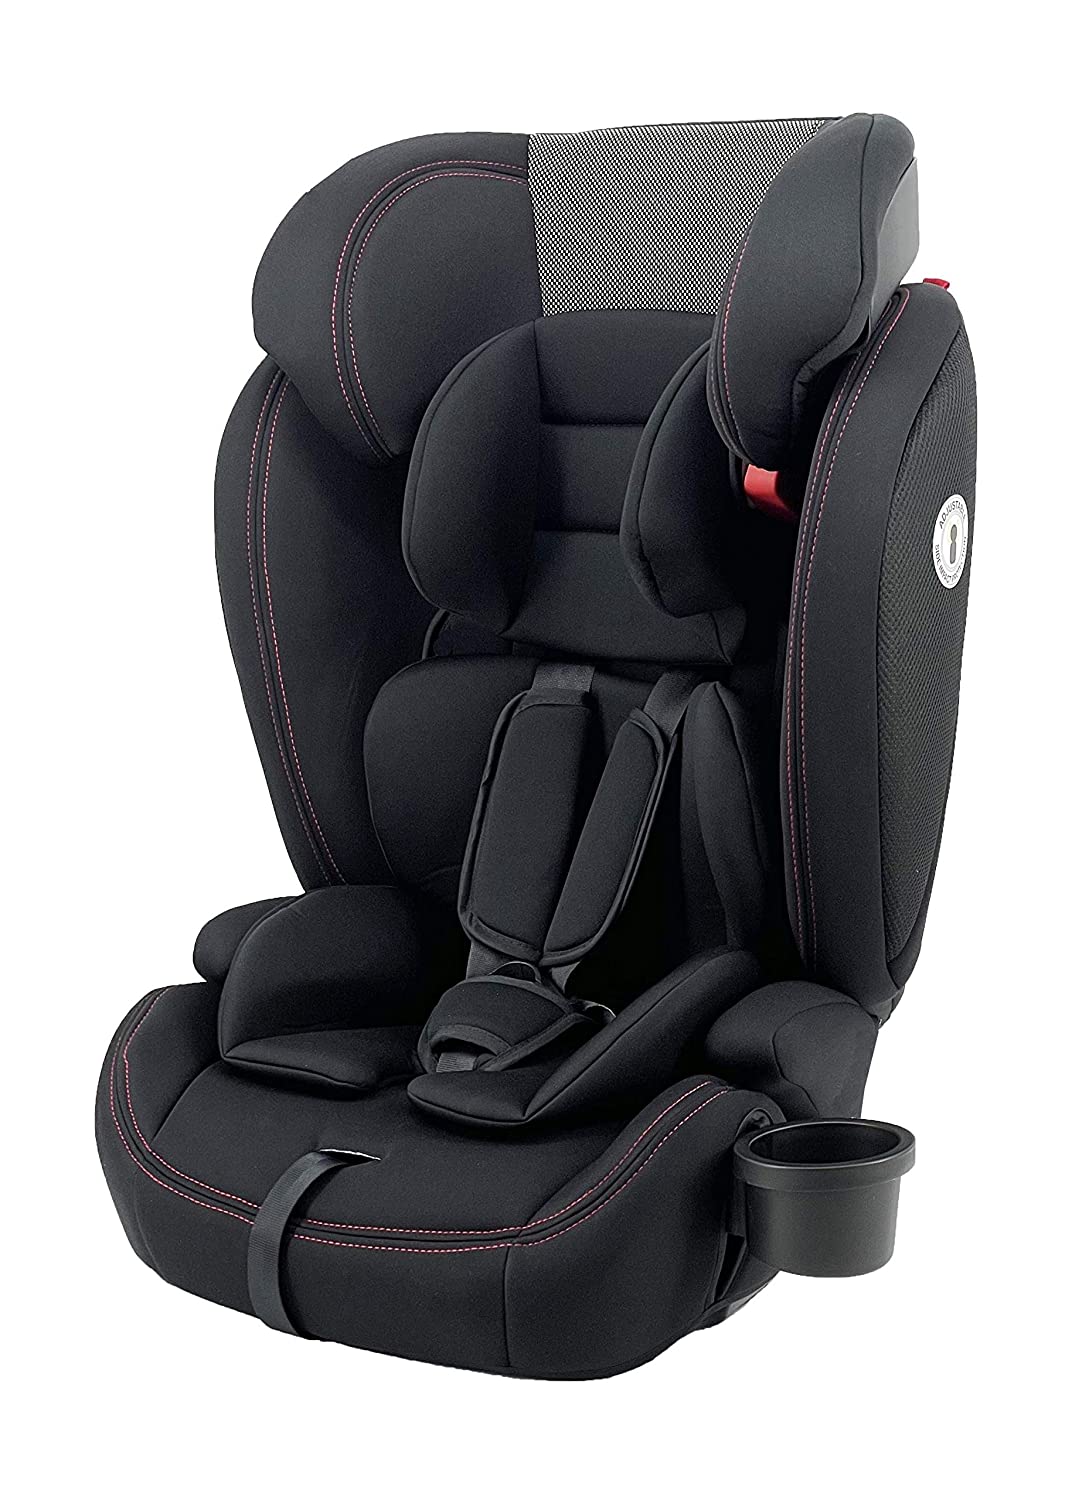 Star Ibaby Babify Hybrid Fix Group 123 - SPS + Isofix - Convertible to Isofix Booster Seat - Black